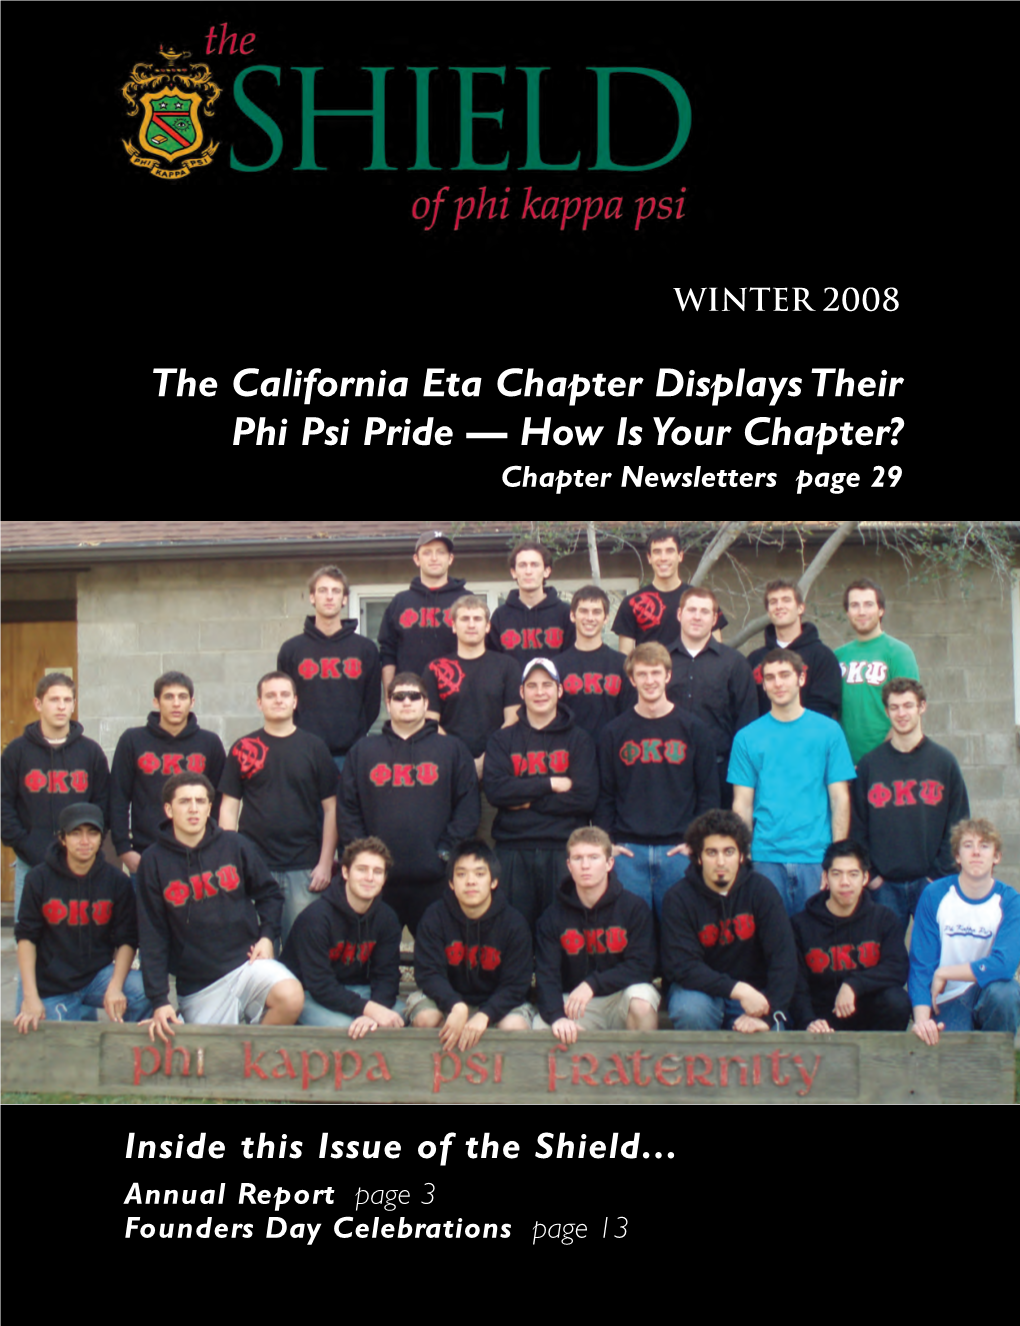 The California Eta Chapter Displays Their Phi Psi Pride — How Is Your Chapter? Chapter Newsletters Page 29